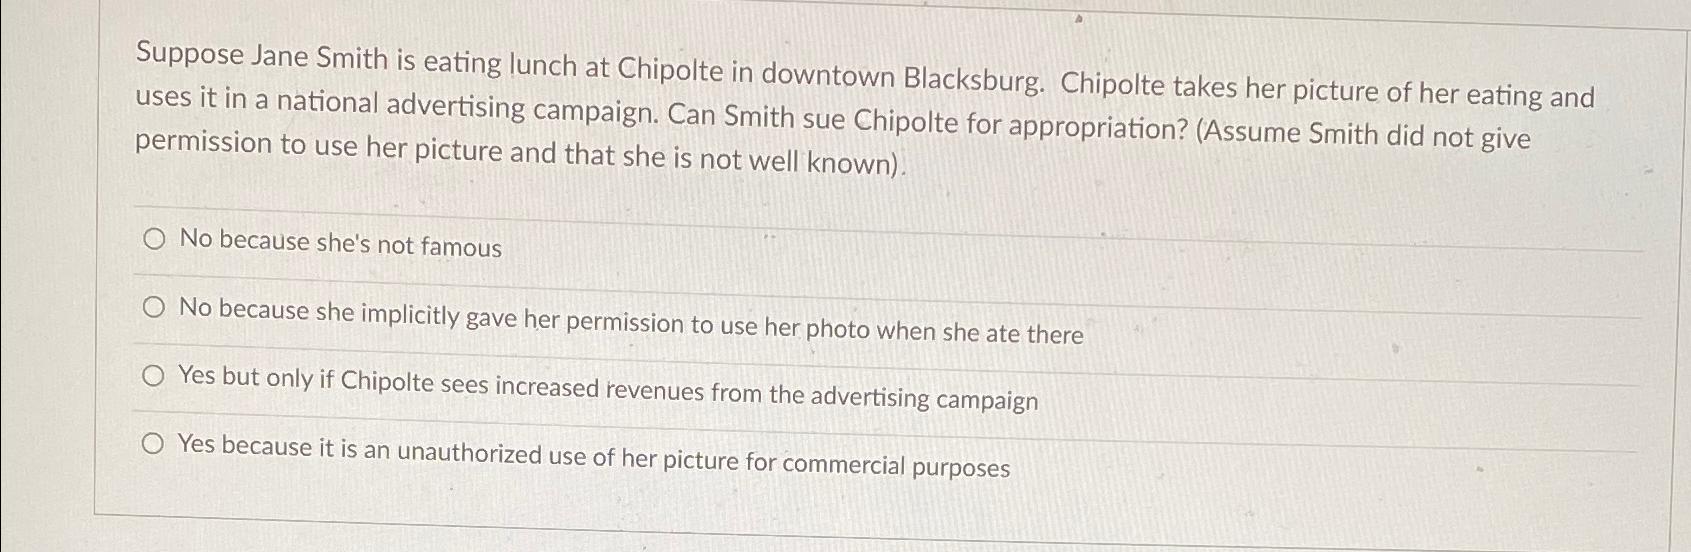 Suppose Jane Smith is eating lunch at Chipolte in downtown Blacksburg. Chipolte takes her picture of her